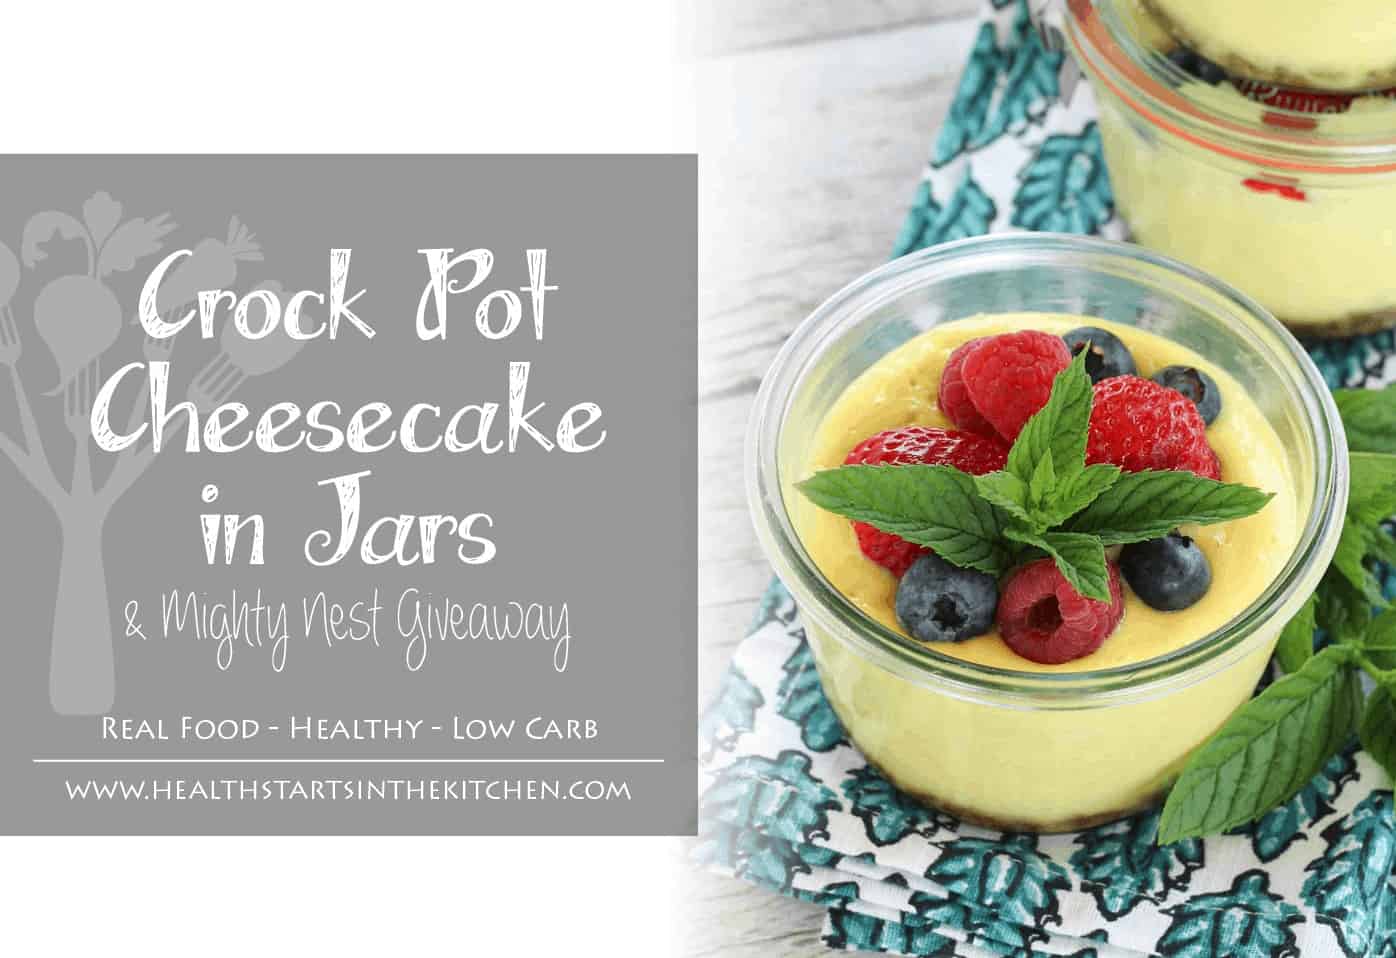 Crock Pot Cheesecake in Jars & Mighty Nest Giveaway - Health Starts in the Kitchen - Grain/Gluten Free - Real Food - Low Carb